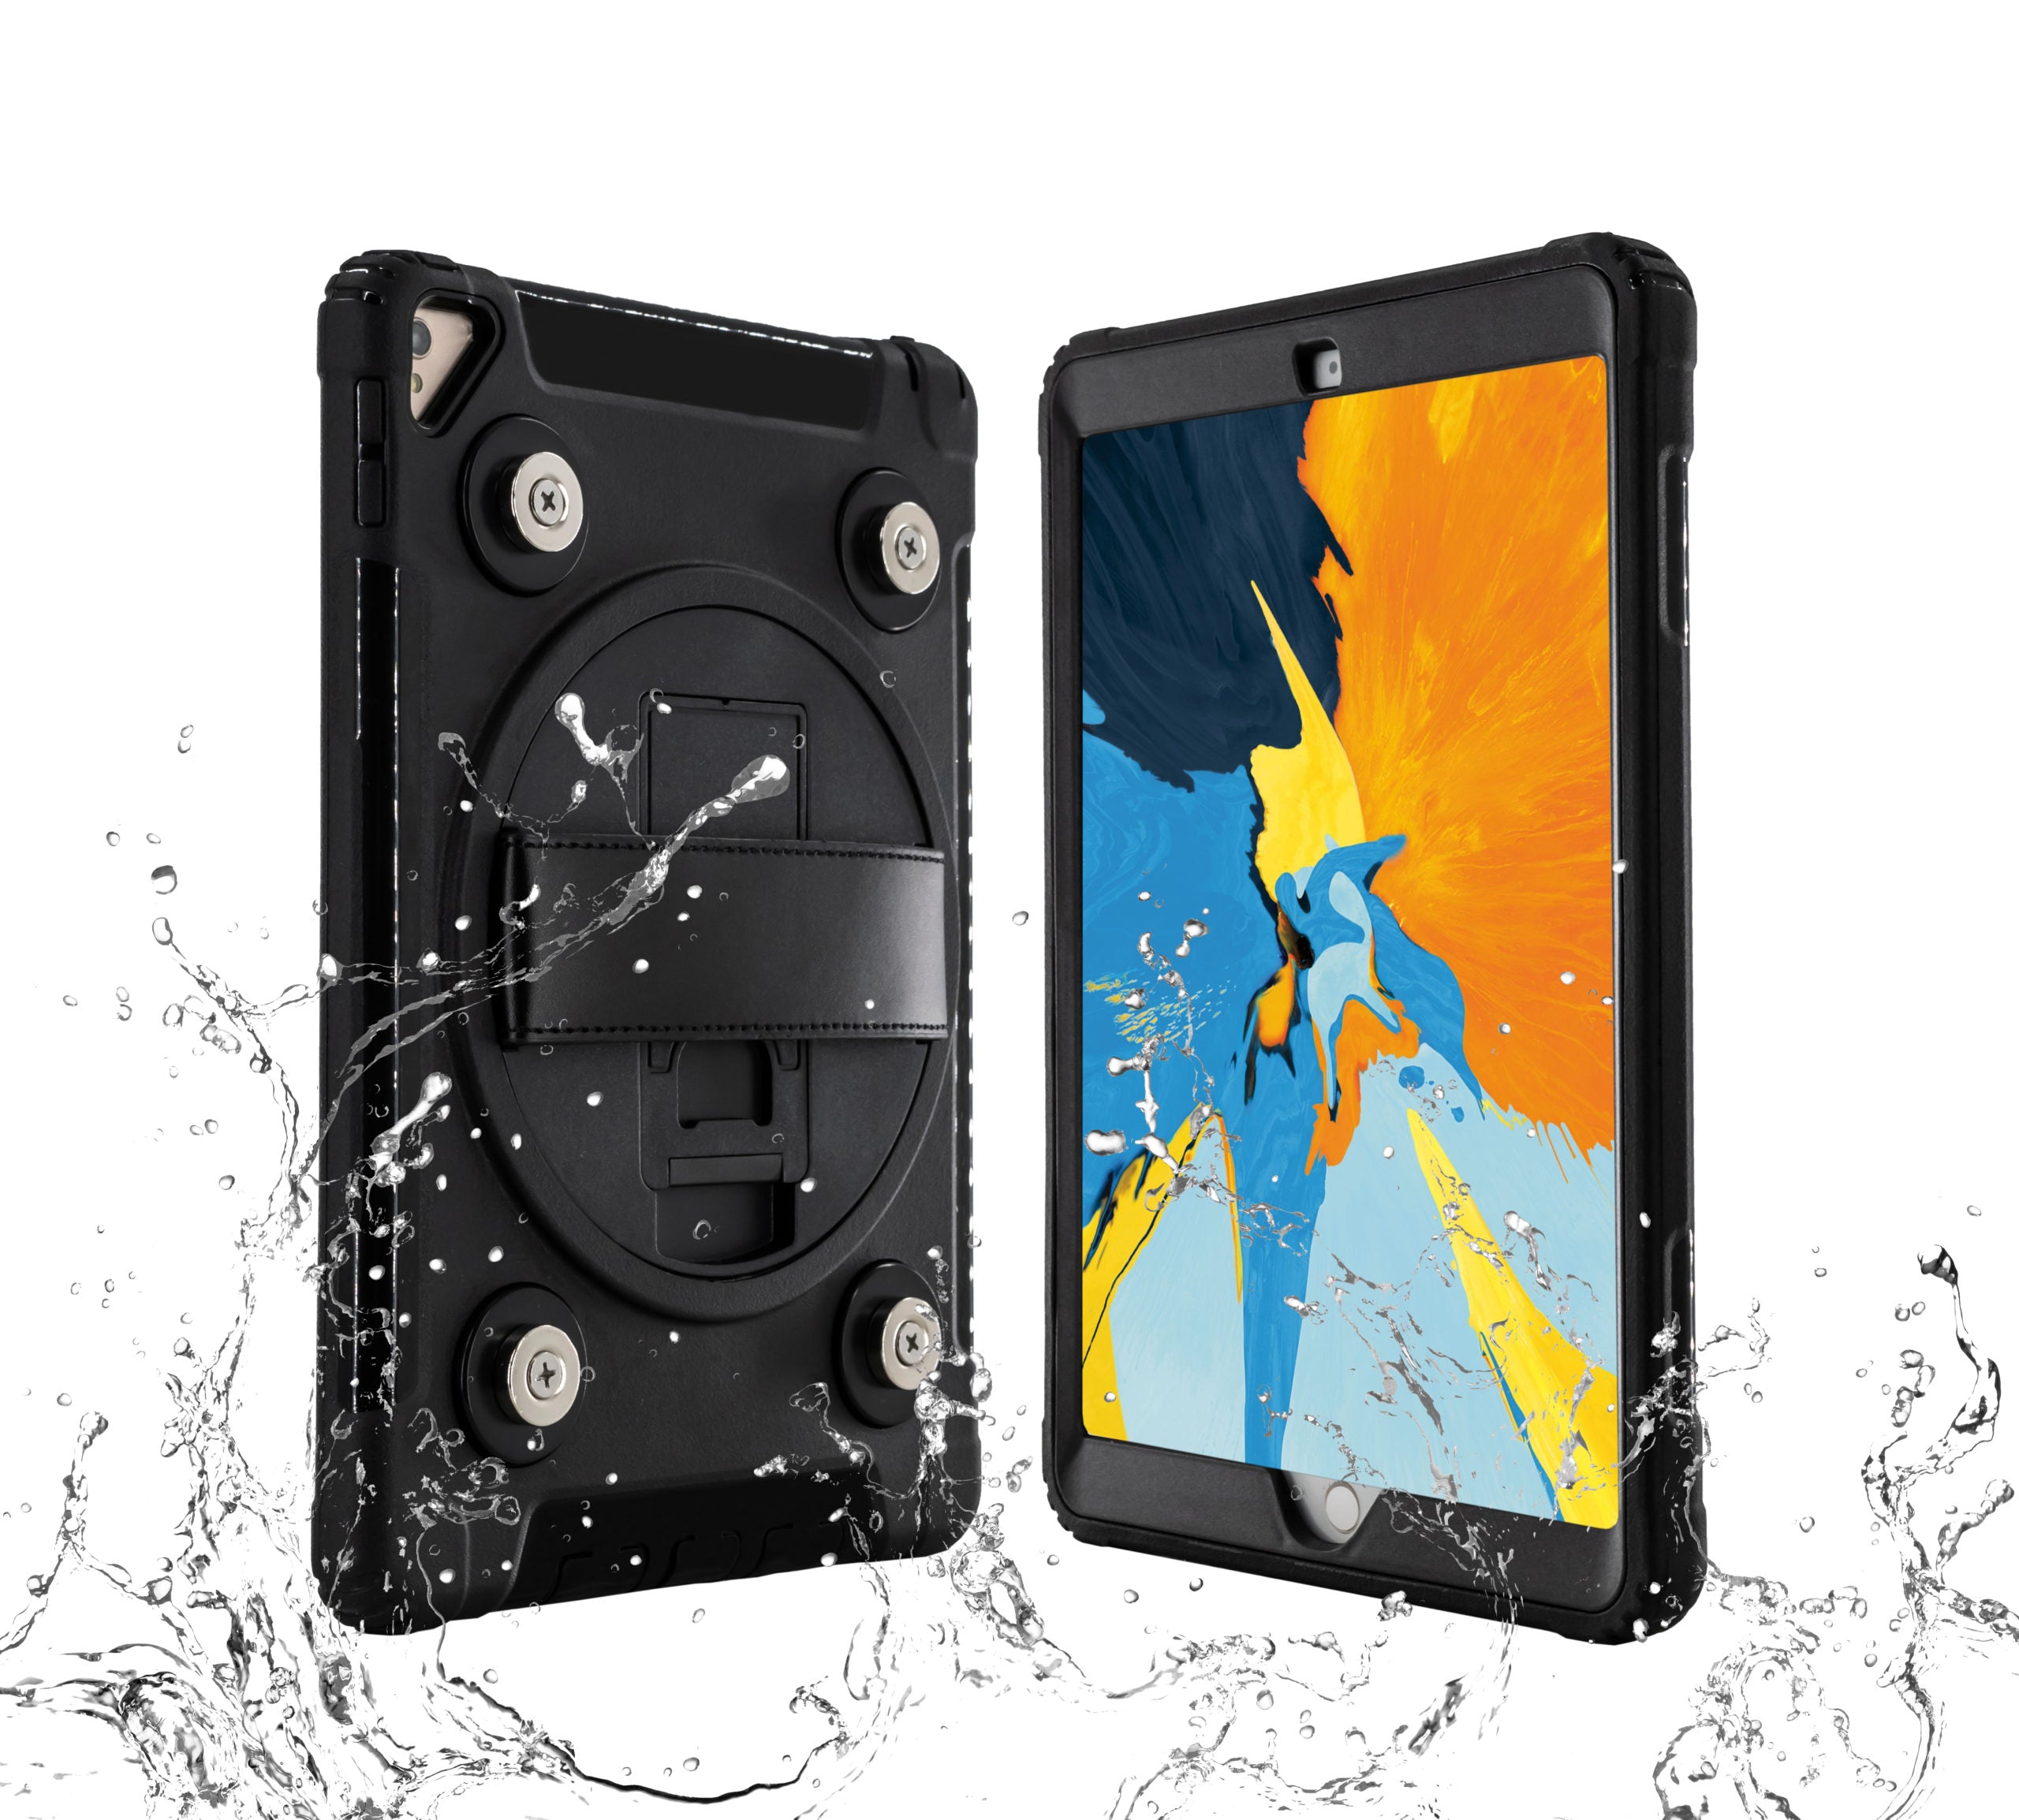 Magnetic Splash-Proof Case with Metal Mounting Plates for iPad 7th/ 8th/ 9th Gen 10.2”, iPad Air 3 & iPad Pro 10.5"